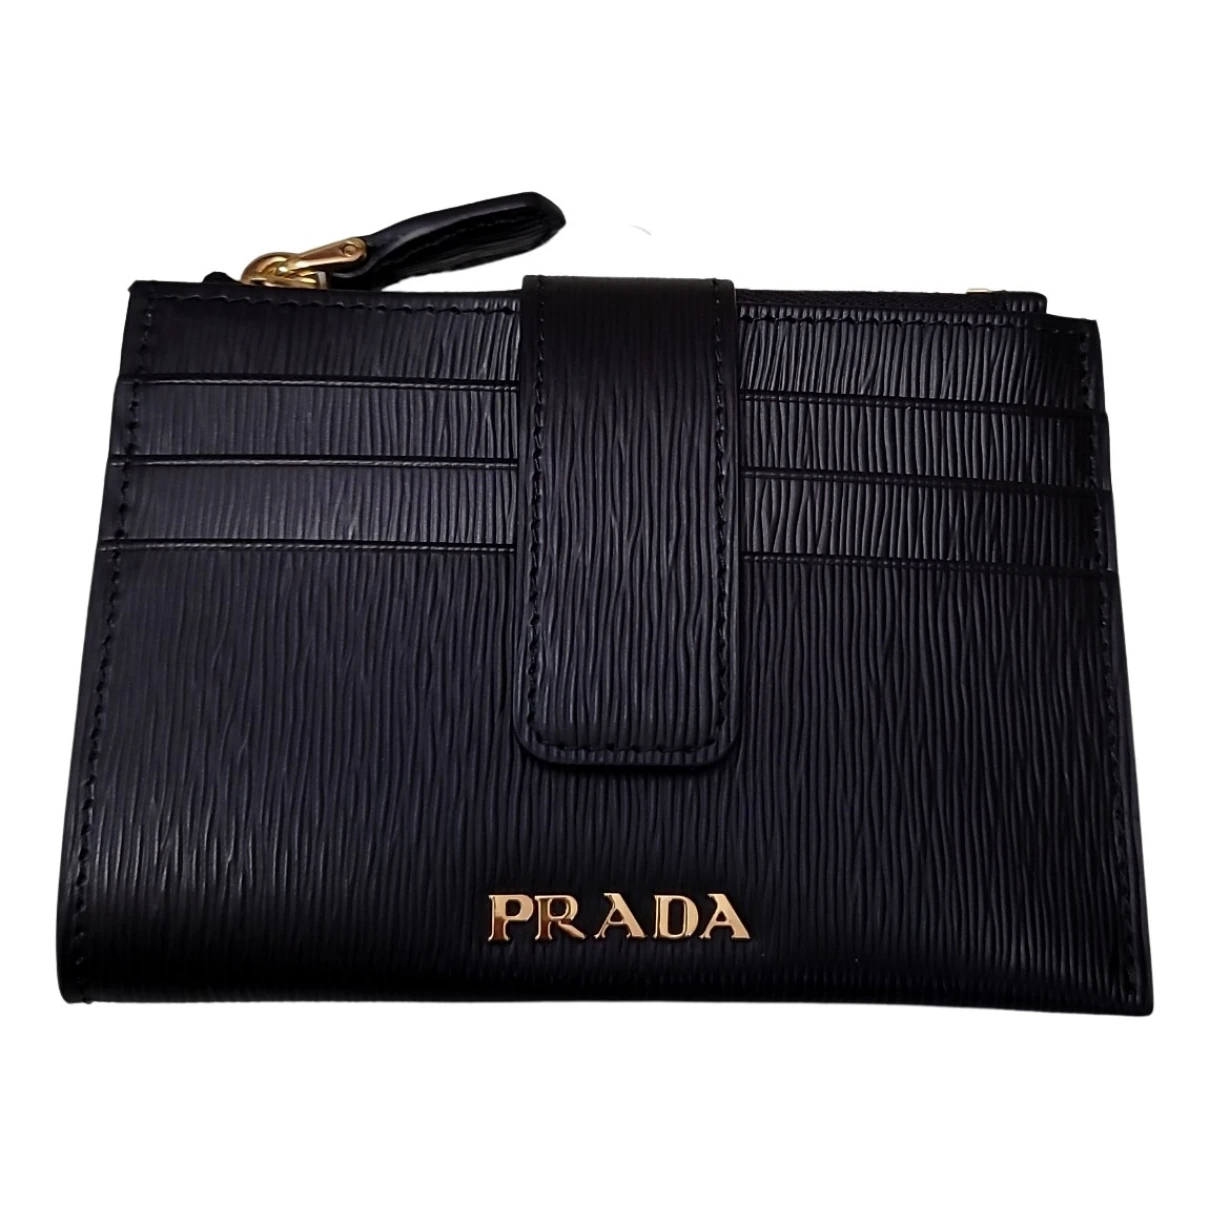 accessories Prada purses, wallets & cases for Female Leather. Used condition